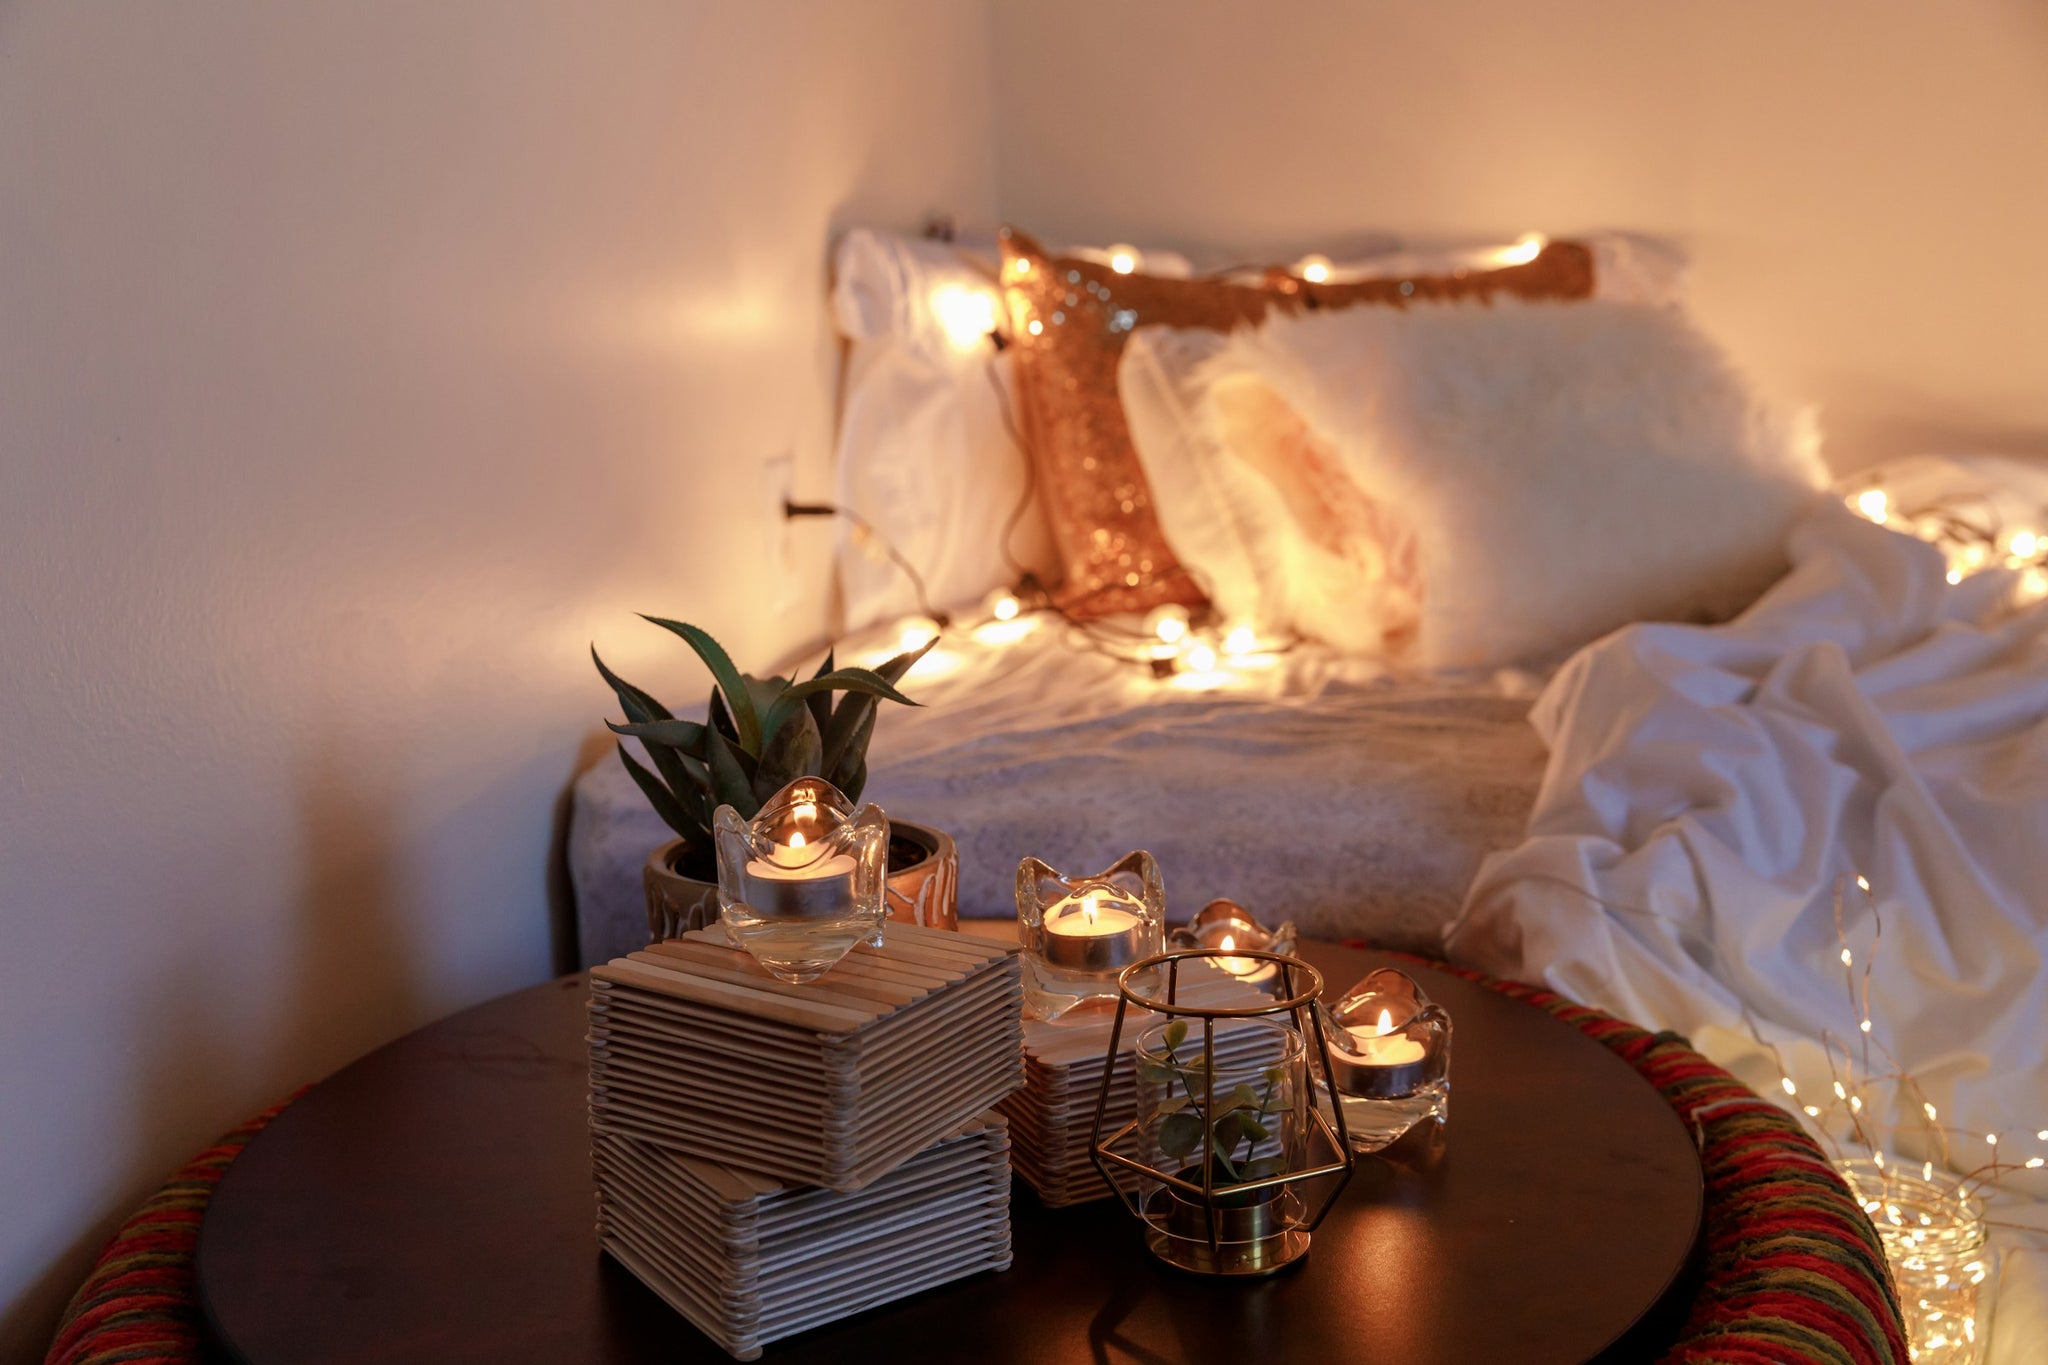 Hygge A Danish Concept That Embodies Coziness, Comfort, And Contentment